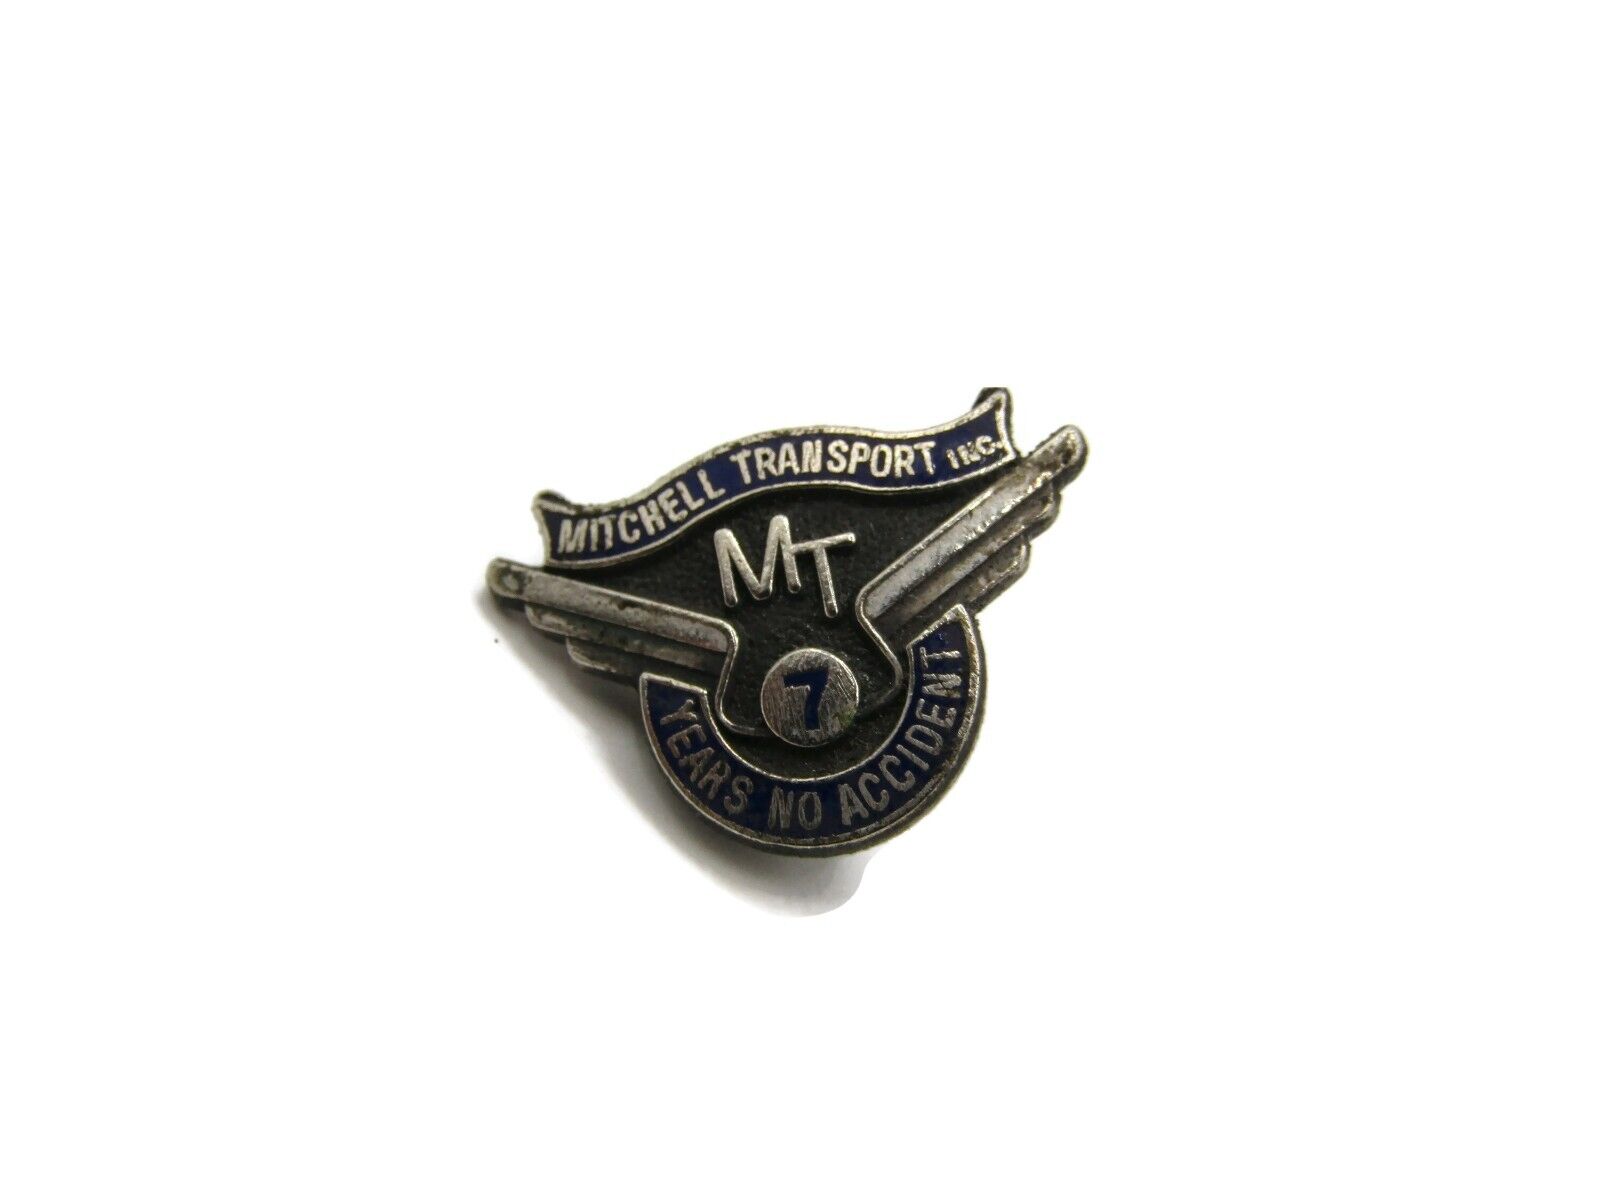 Mitchell Transport Inc. MT 7 Years No Accident Pin Vintage Beautiful Design